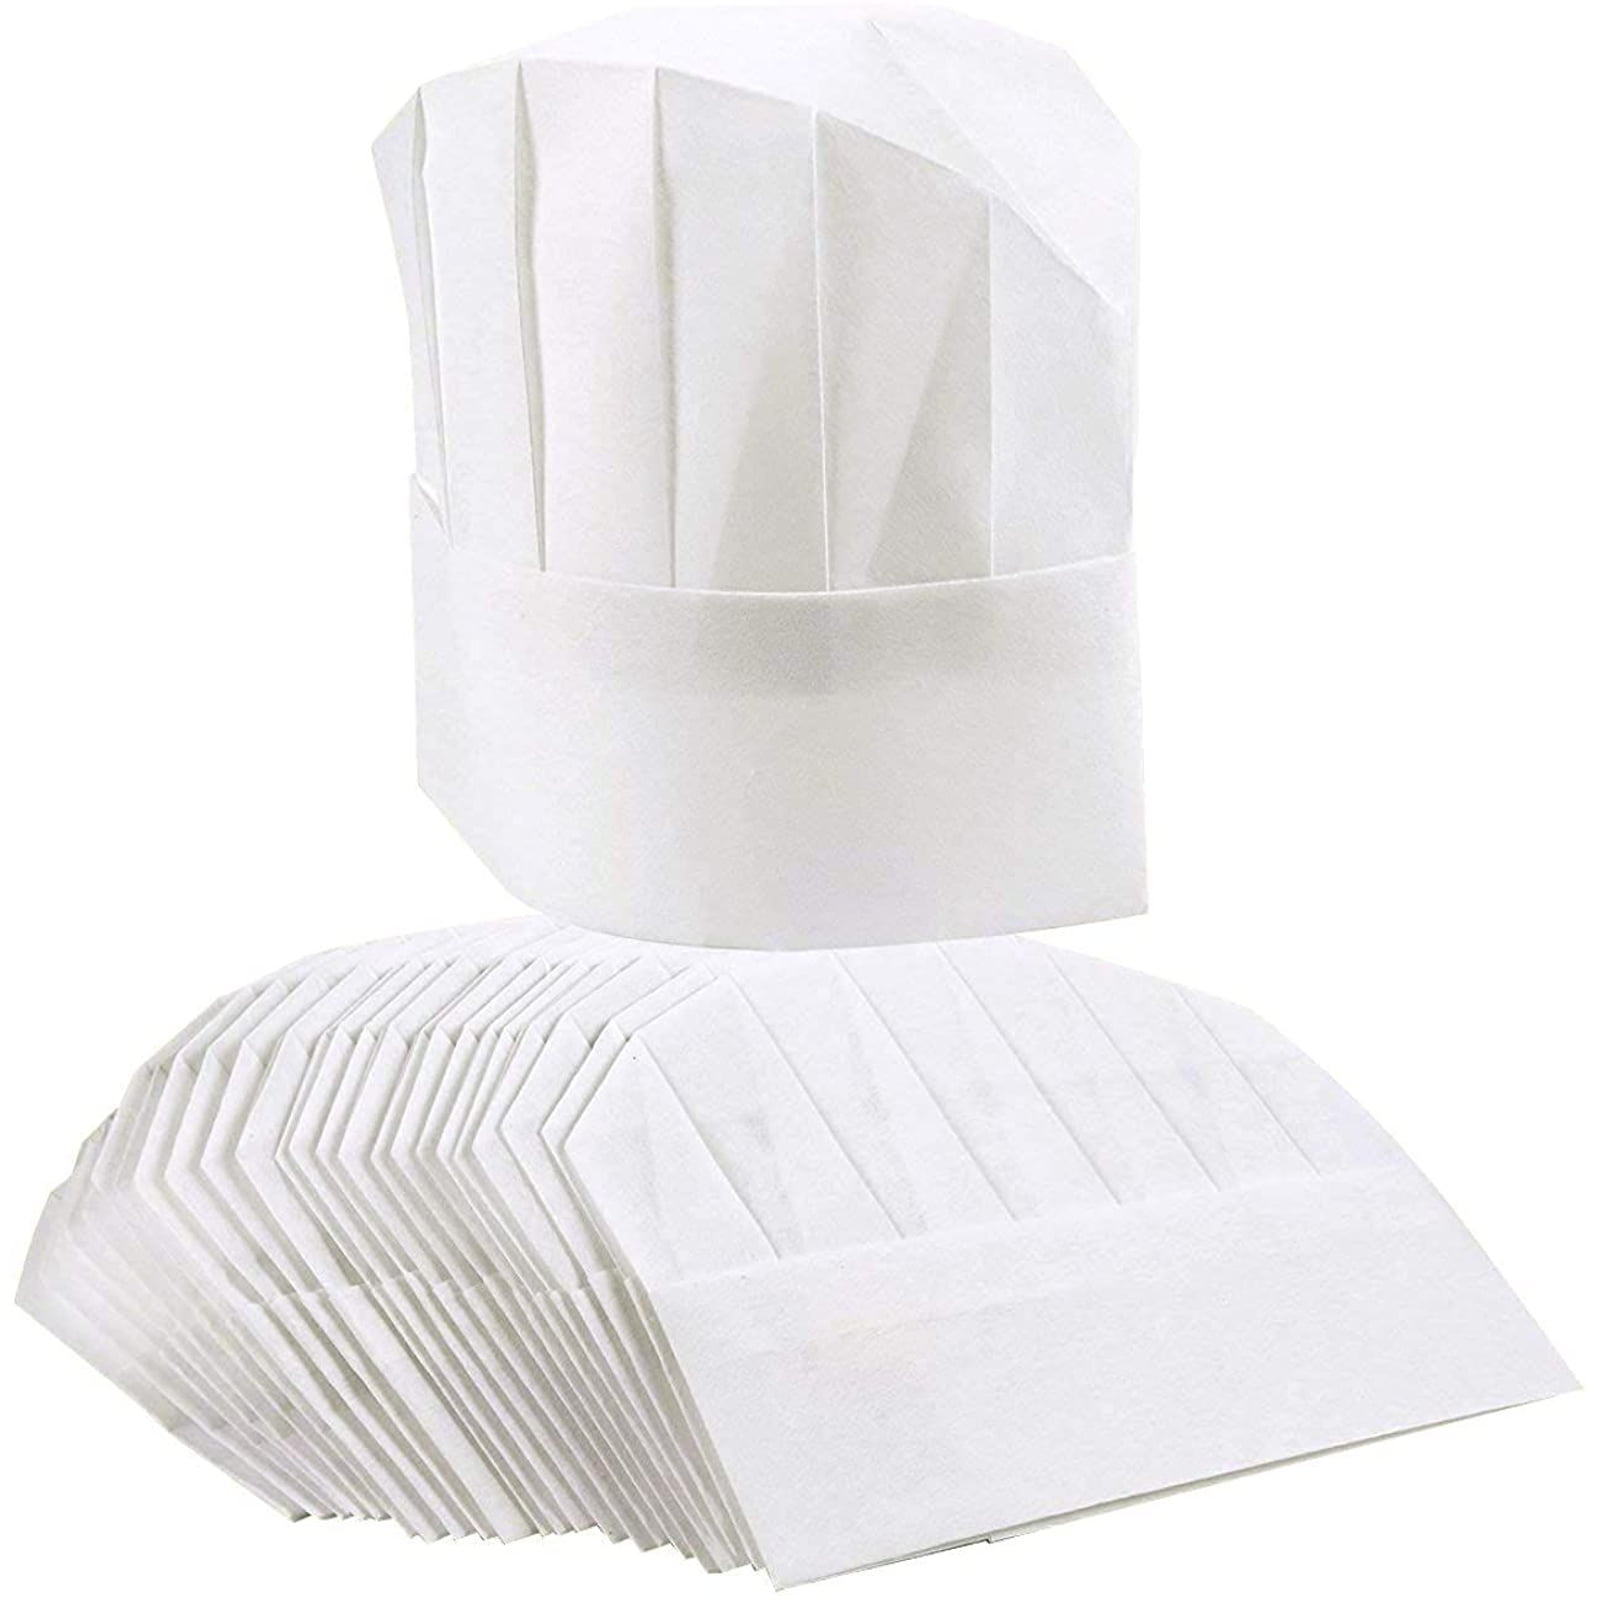 Chef Hats Adjustable Professional Kitchen Chef Caps for Baking 20-22 Inches in Circumference 24-Pack Disposable White Paper Chef Toques Chef Supplies Cooking Safety Culinary Hygiene